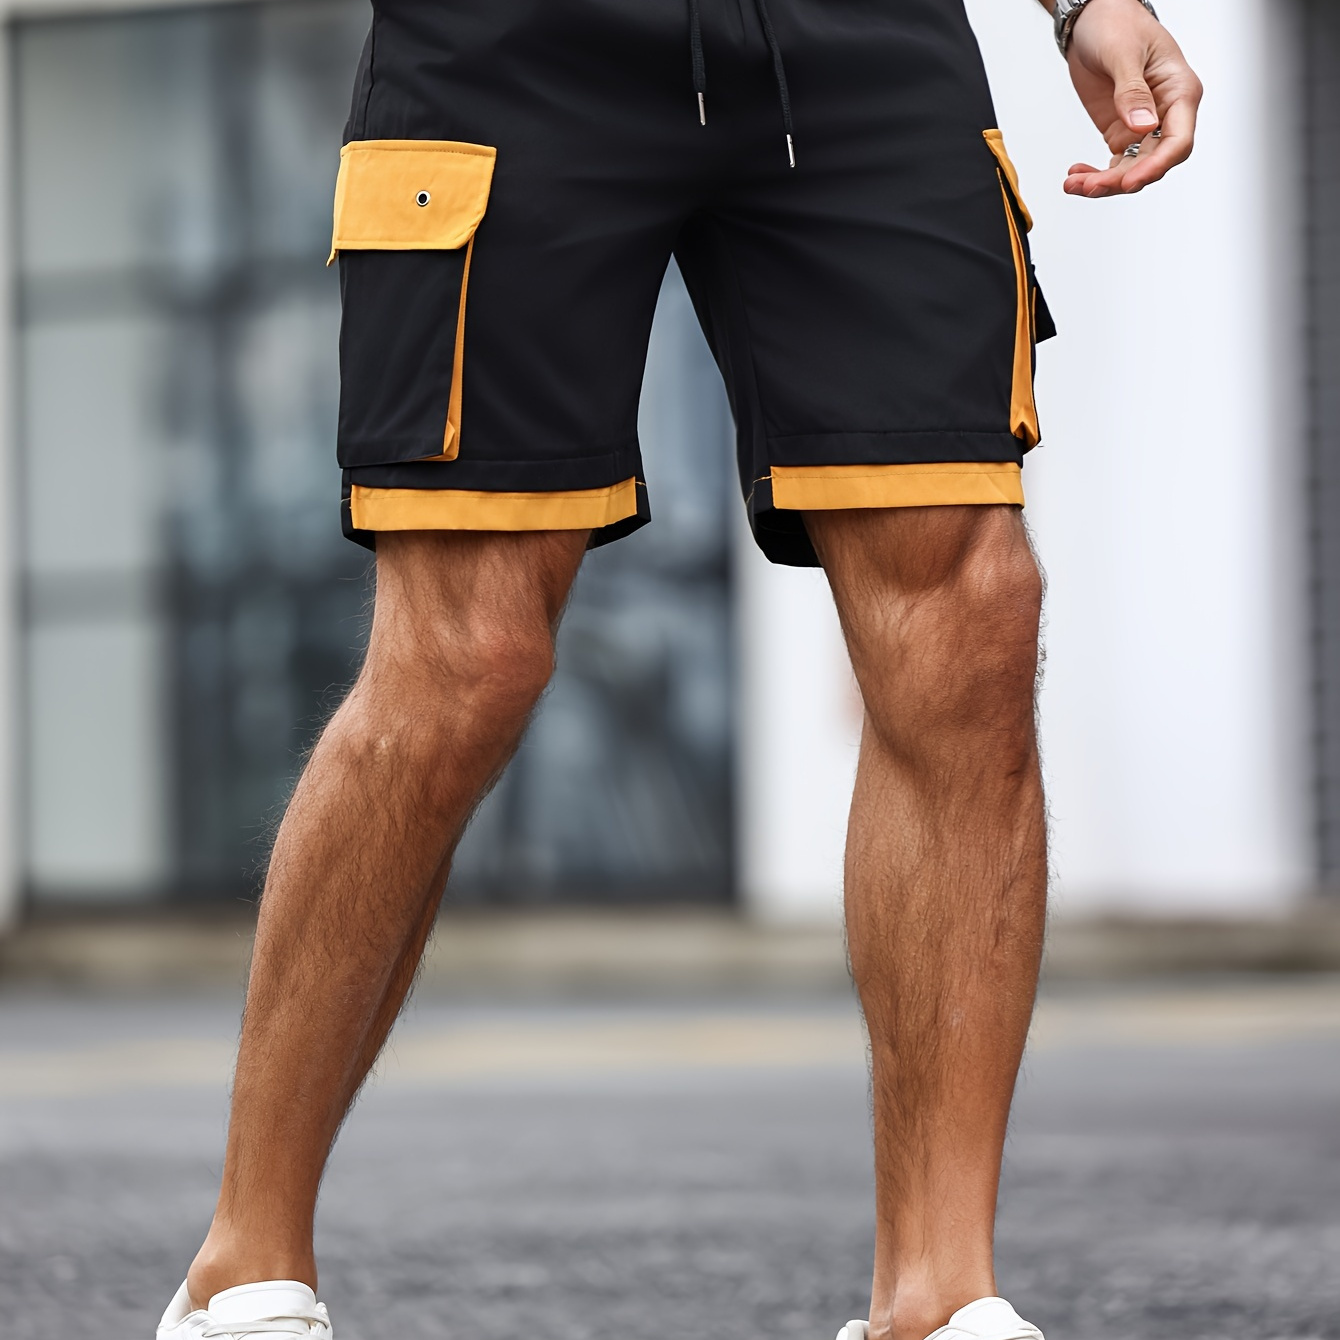 

Contrast Trim Design Men's Stylish Waist Drawstring Cargo Shorts With Side Pockets For Summer Outdoor Leisure And Work